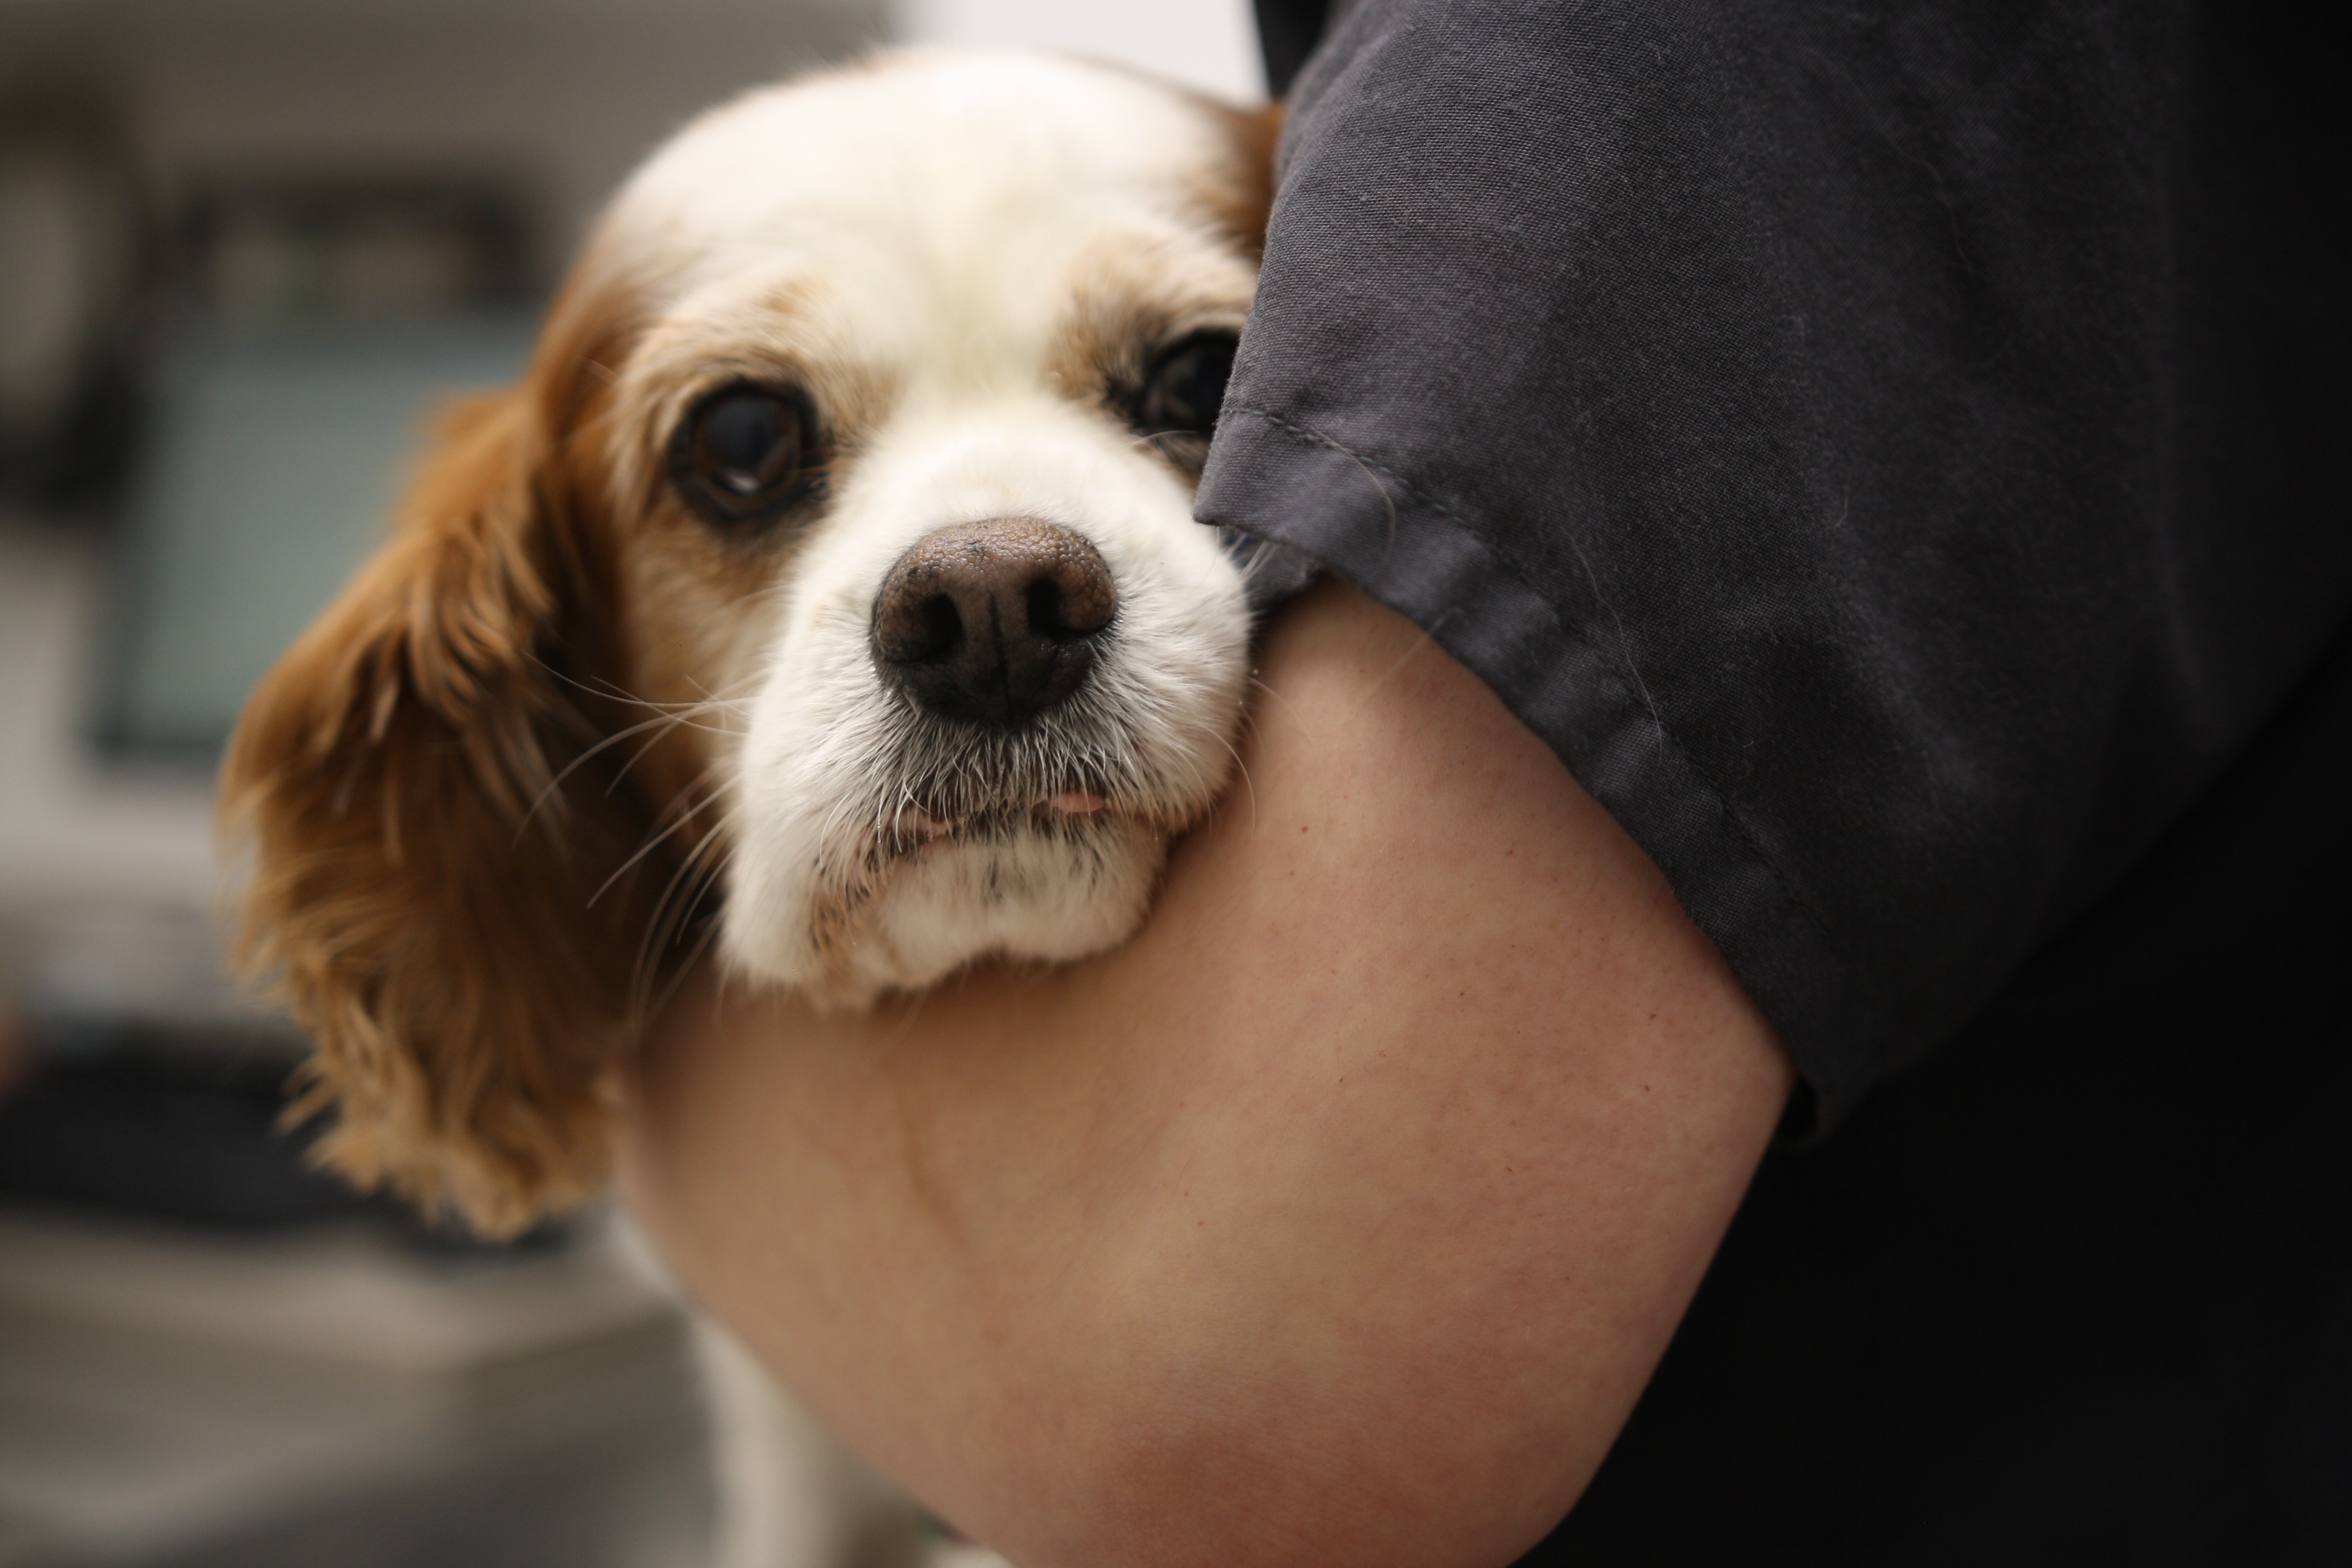 The staff at South Putnam Animal Hospital has a passion for veterinary care that extends beyond just the medicine. It is our goal to help every one of our patients live happy, healthy lives.